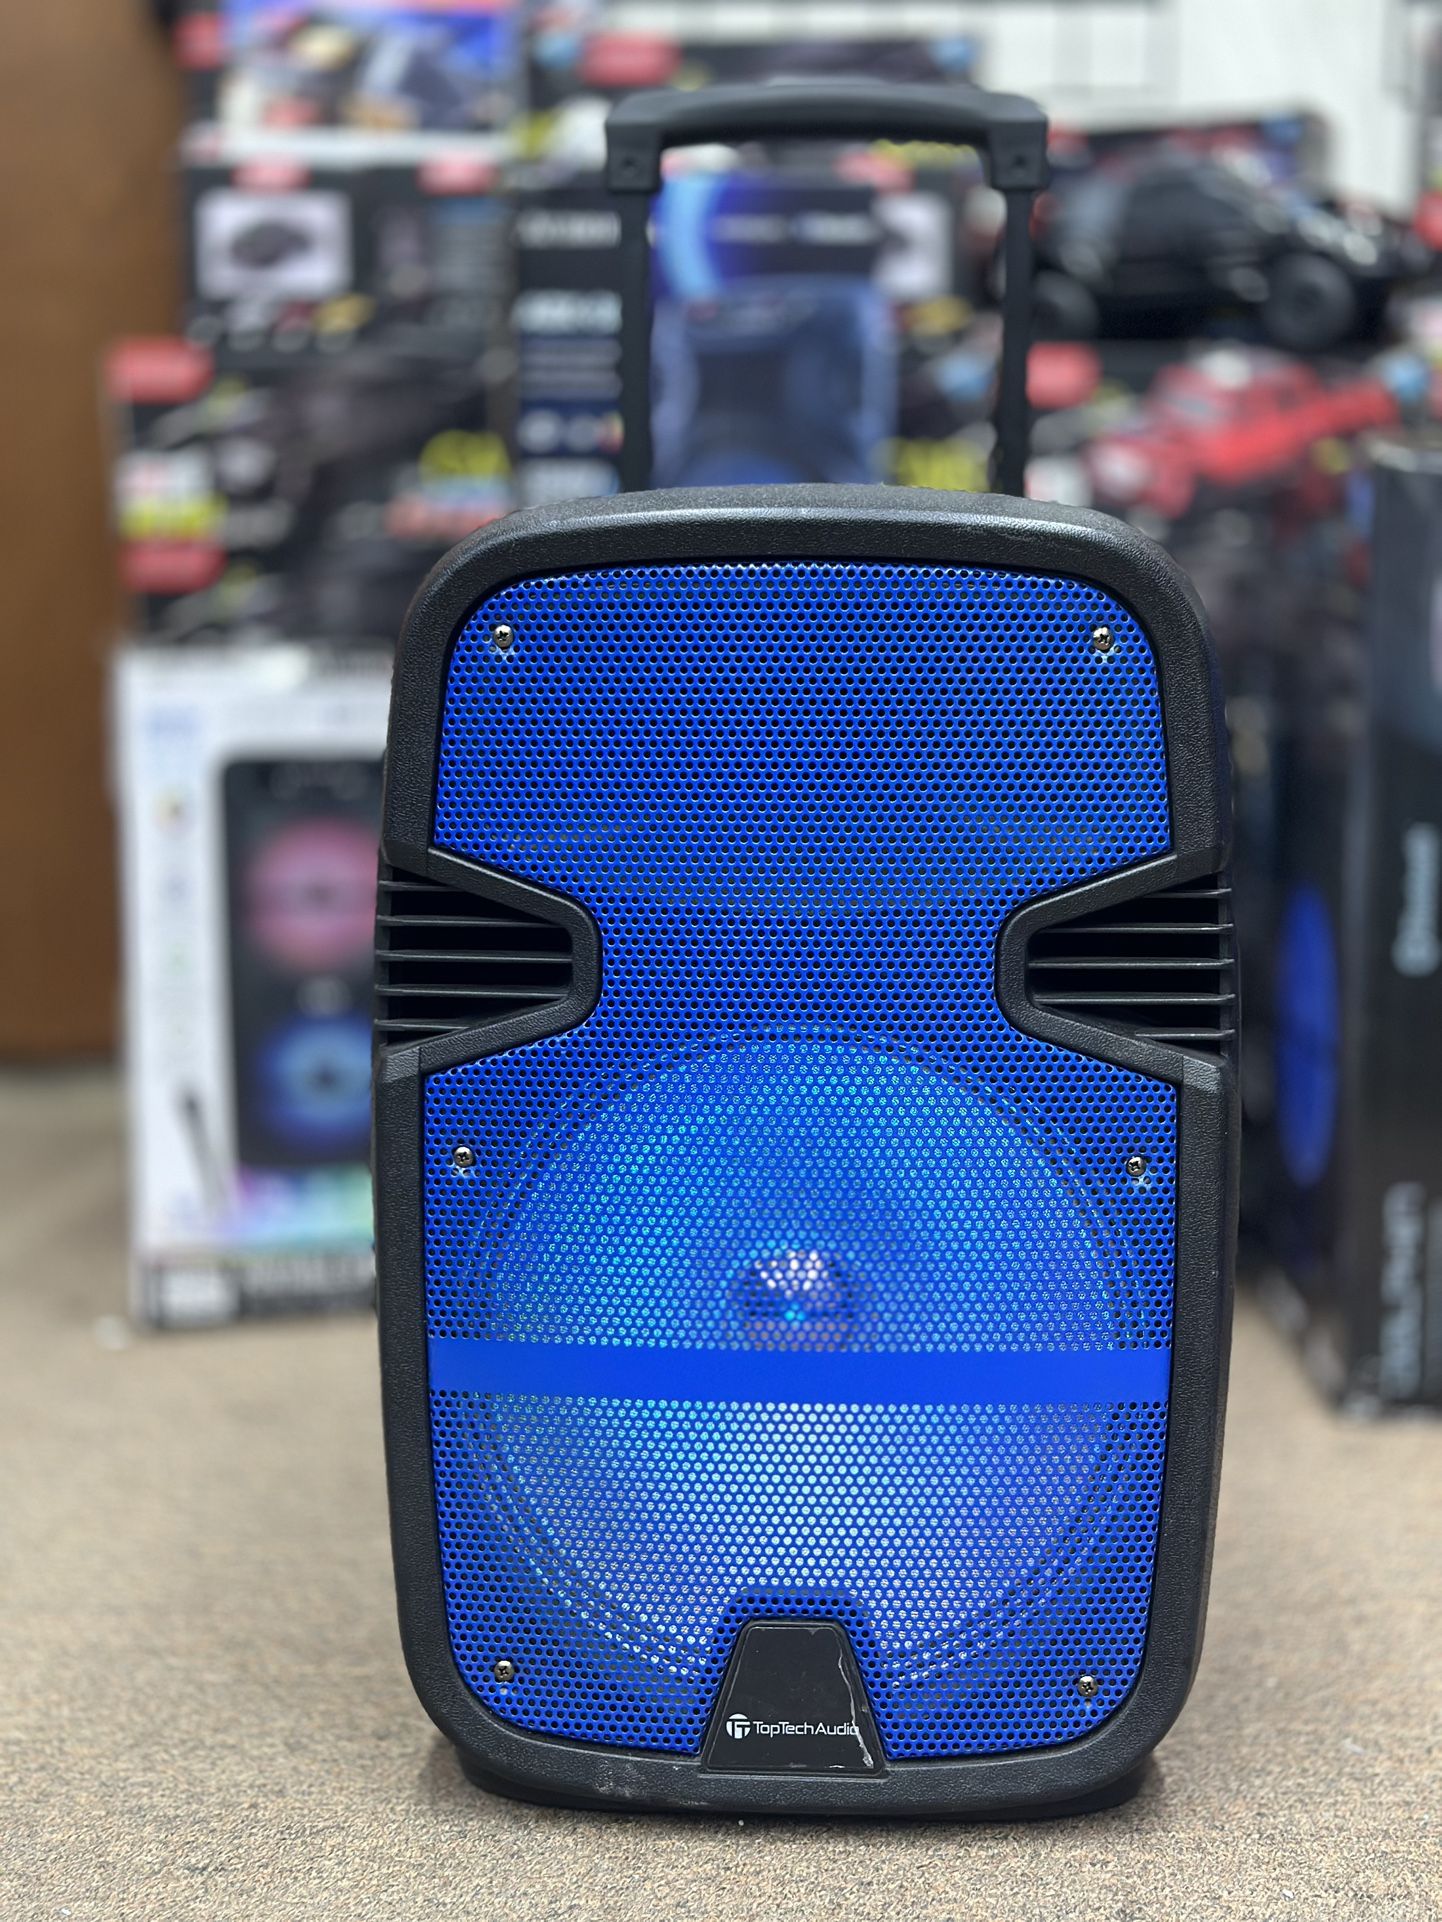 Karaoke Speaker With Bluetooth-Comes With Remote Control 